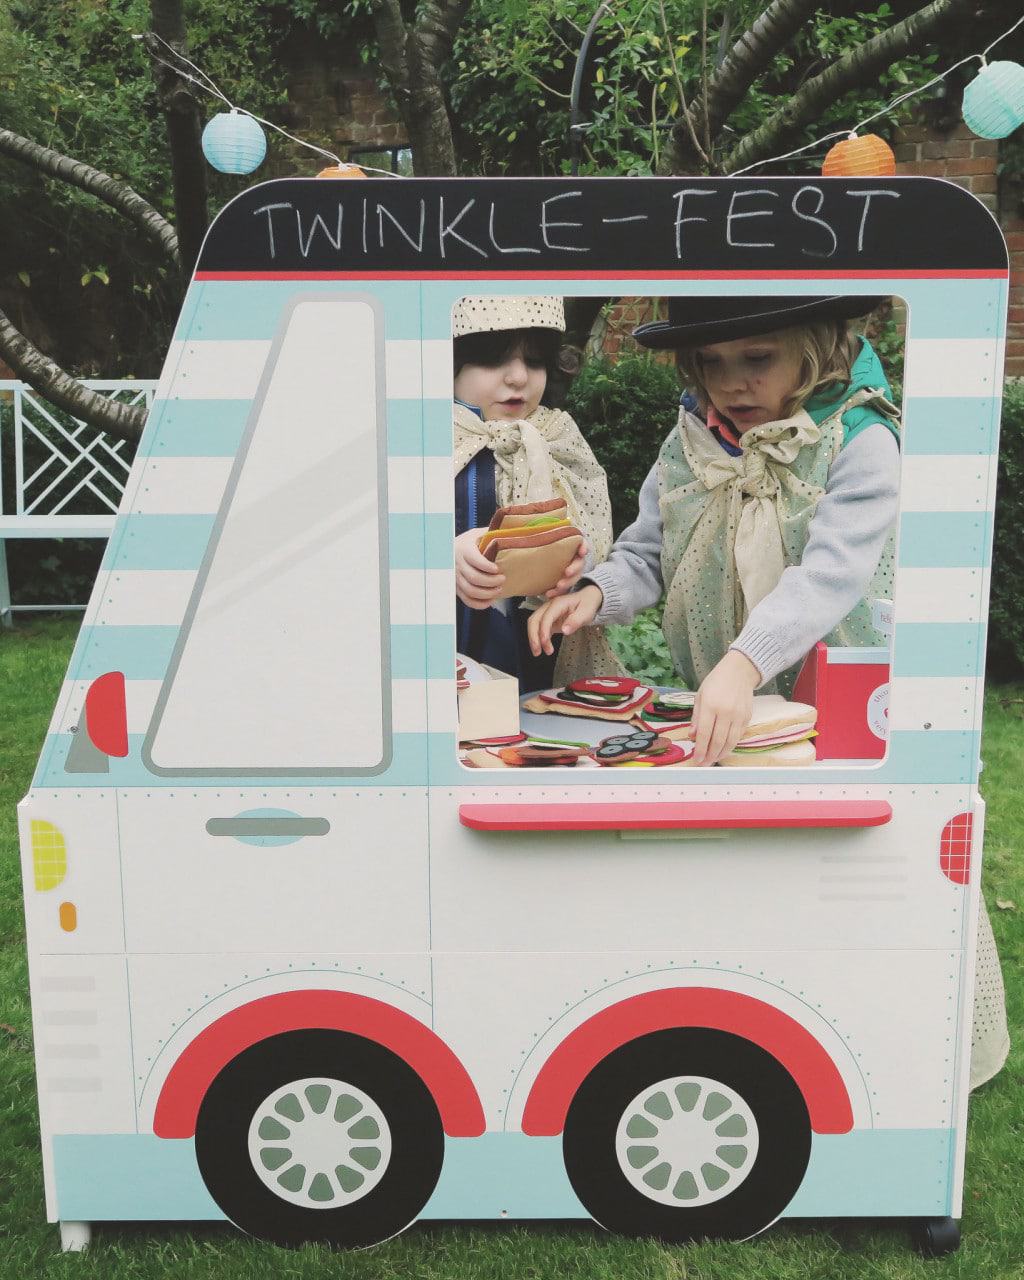 The GLTC festival food van / play kitchen — perfect for imaginative play